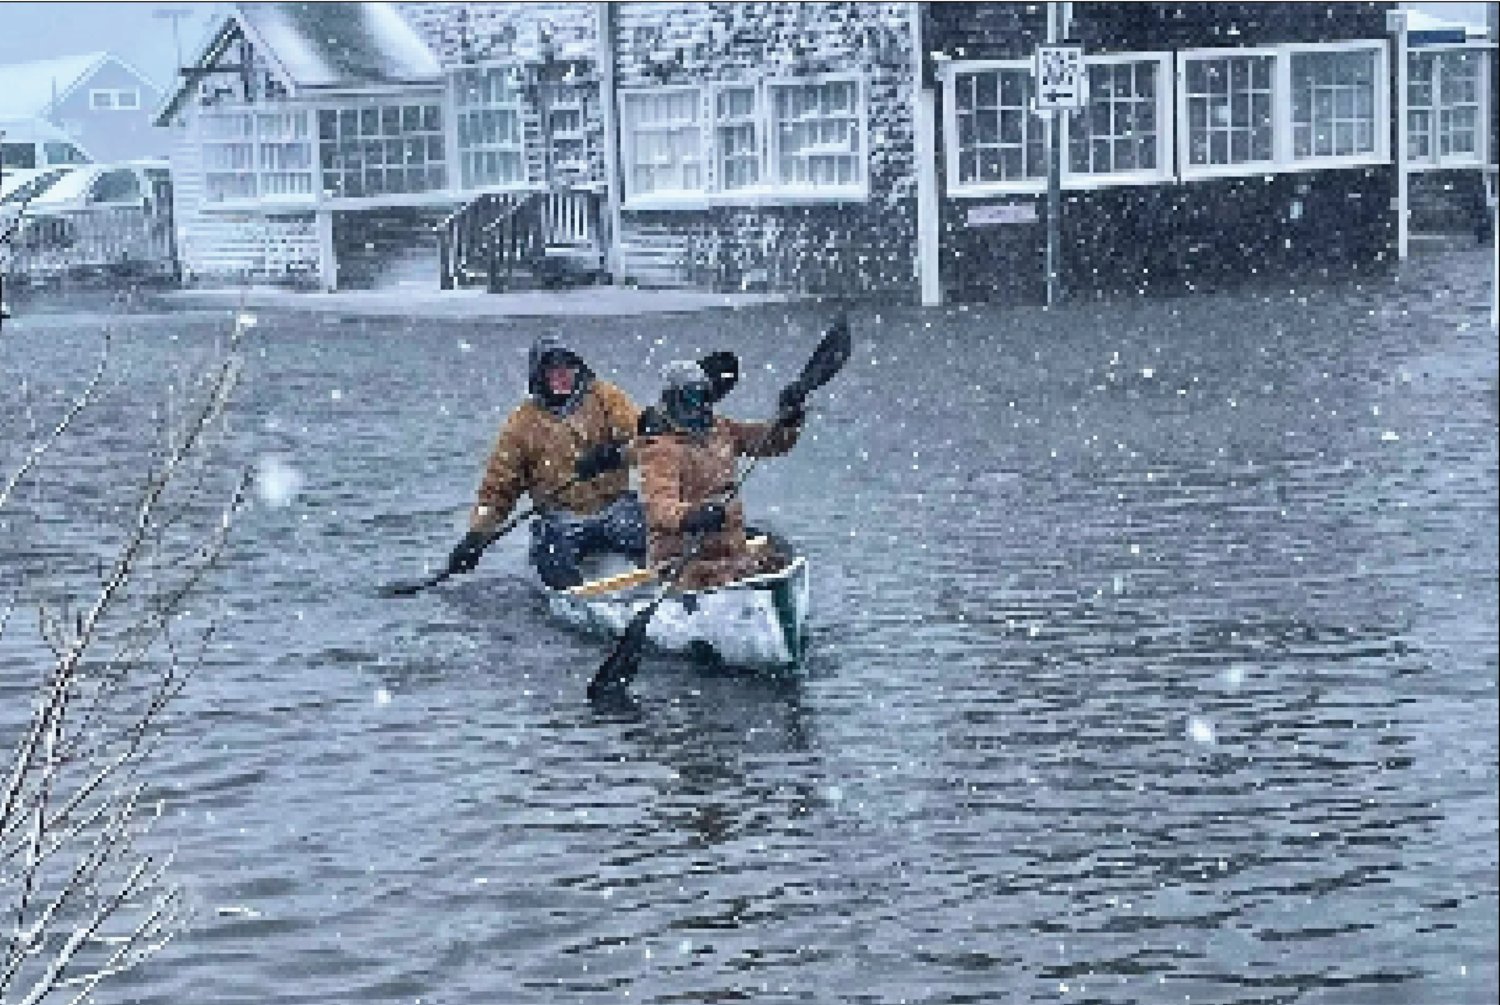 Ian Williams and Luke Stringer paddle down a flooded Broad Street during a powerful nor'easter at the end of January.